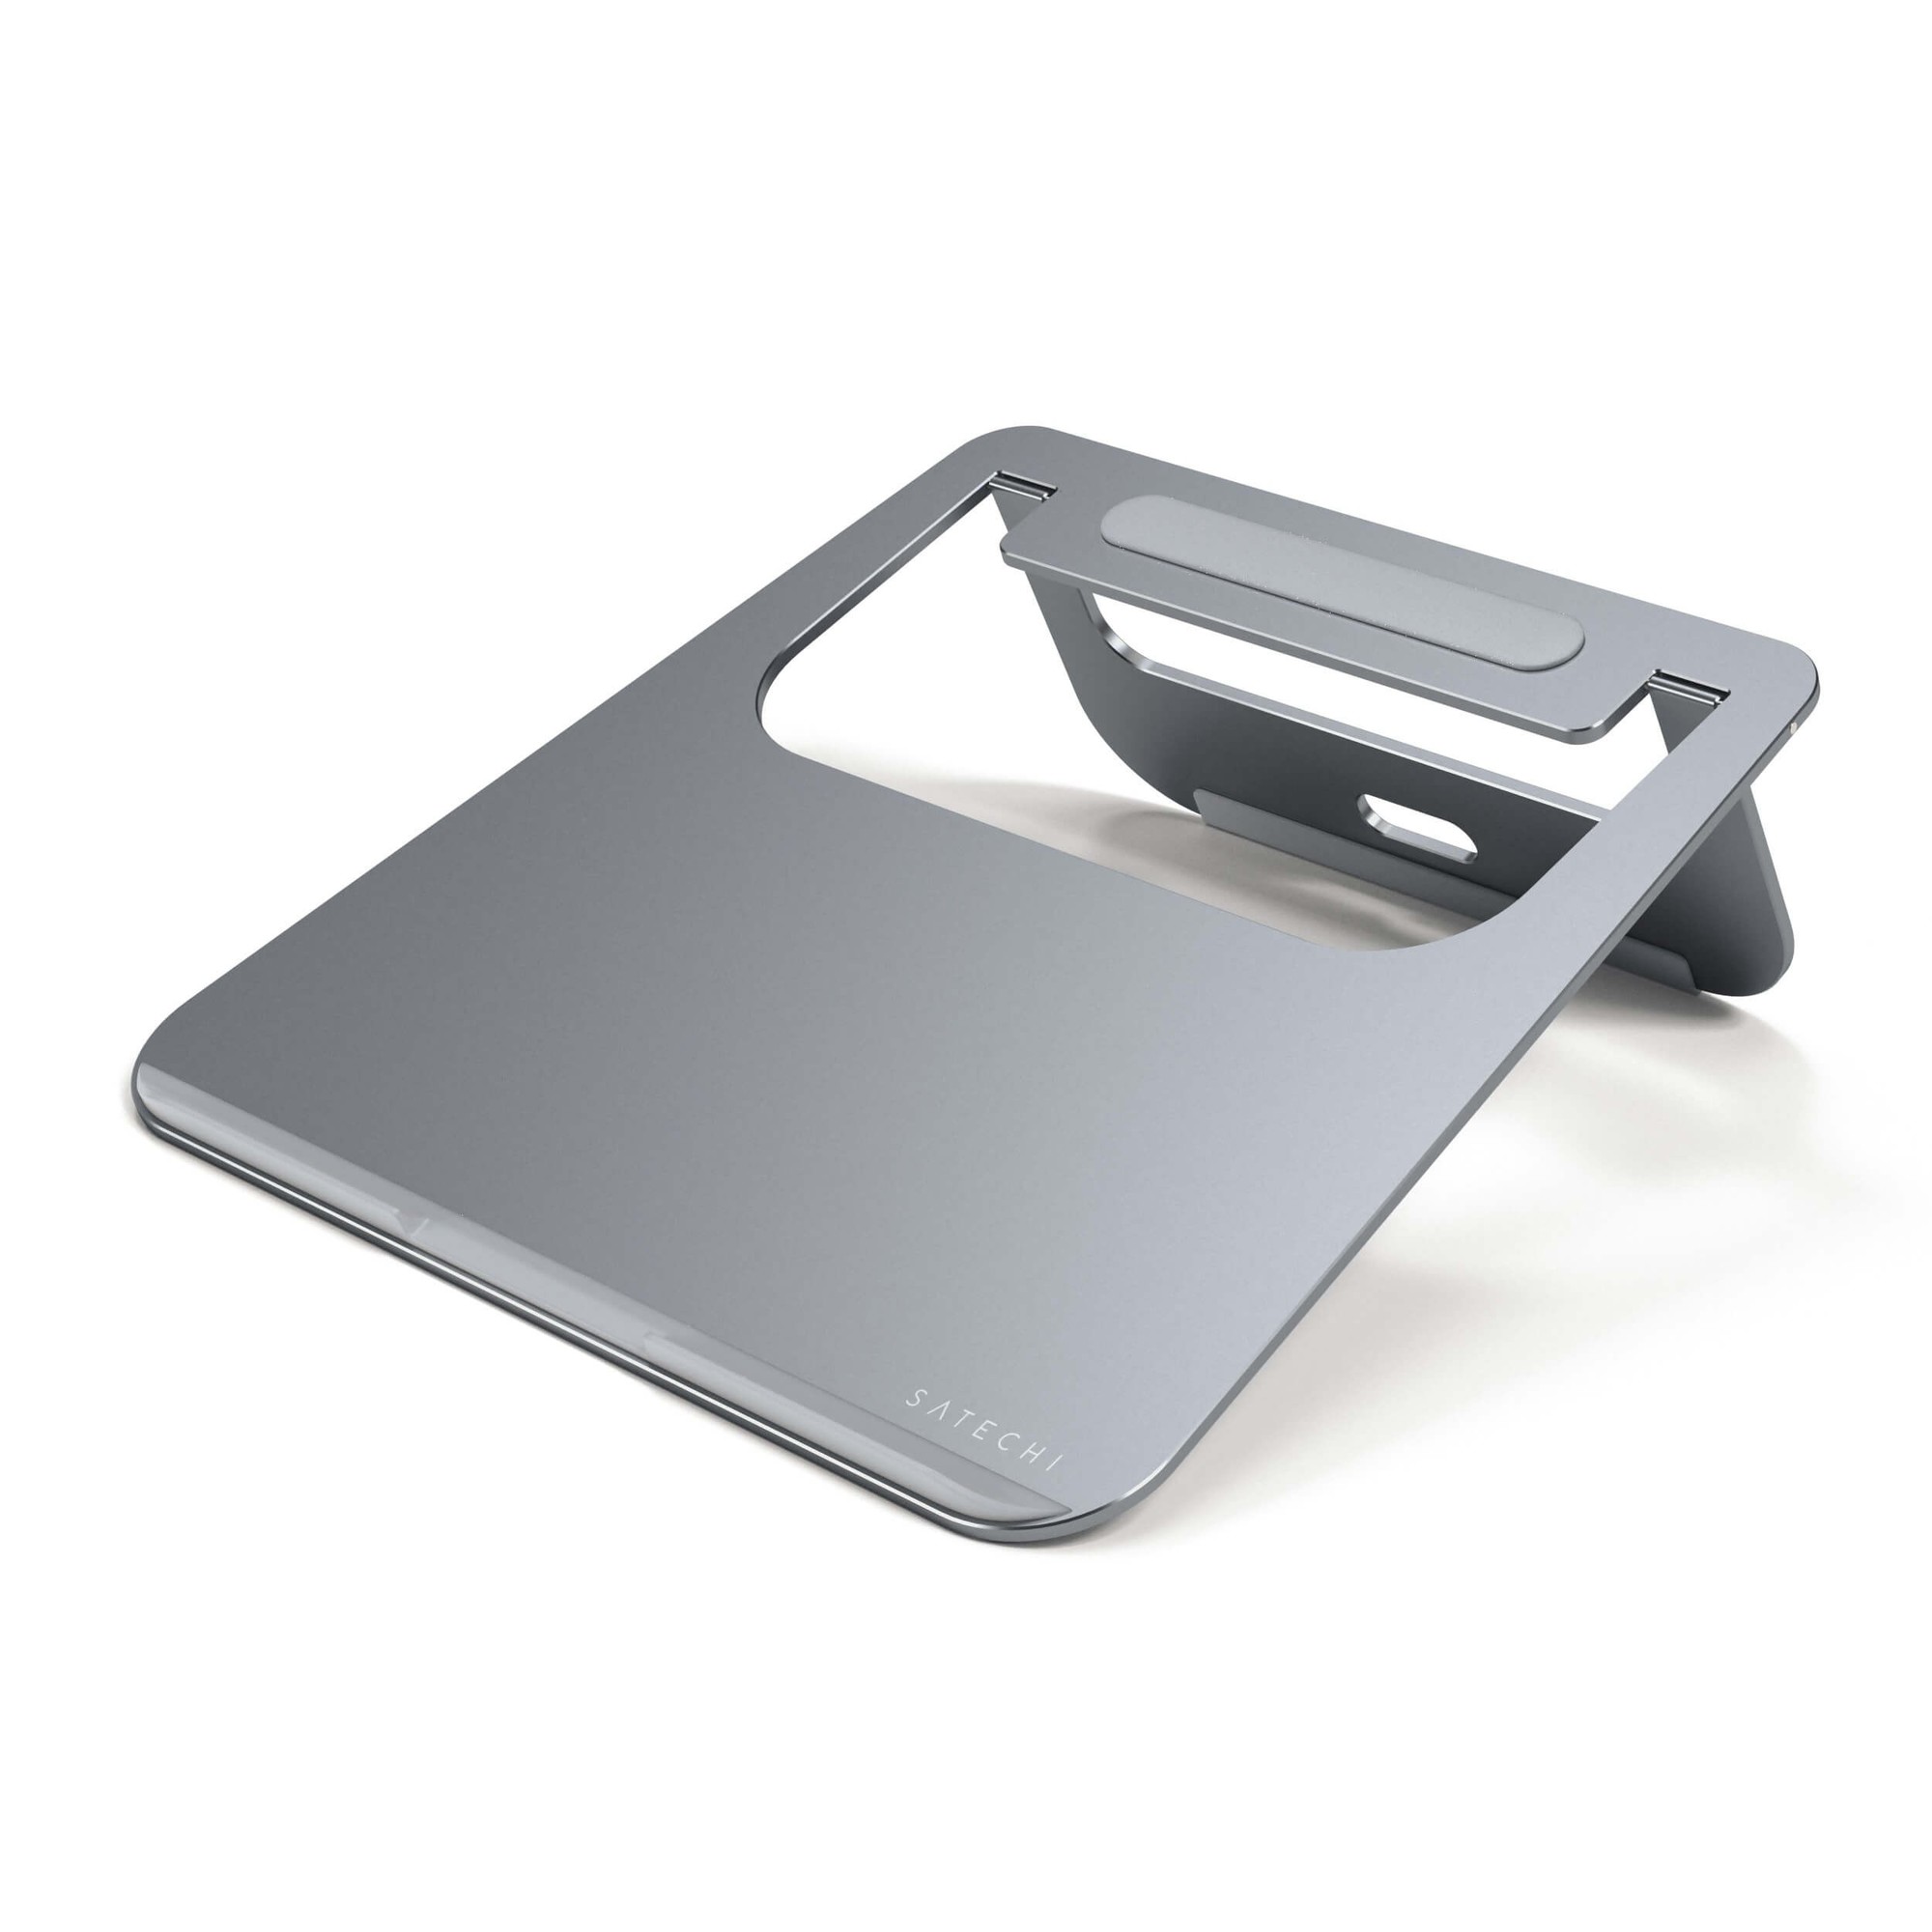 Satechi Aluminum Portable Laptop Stand Space gray 